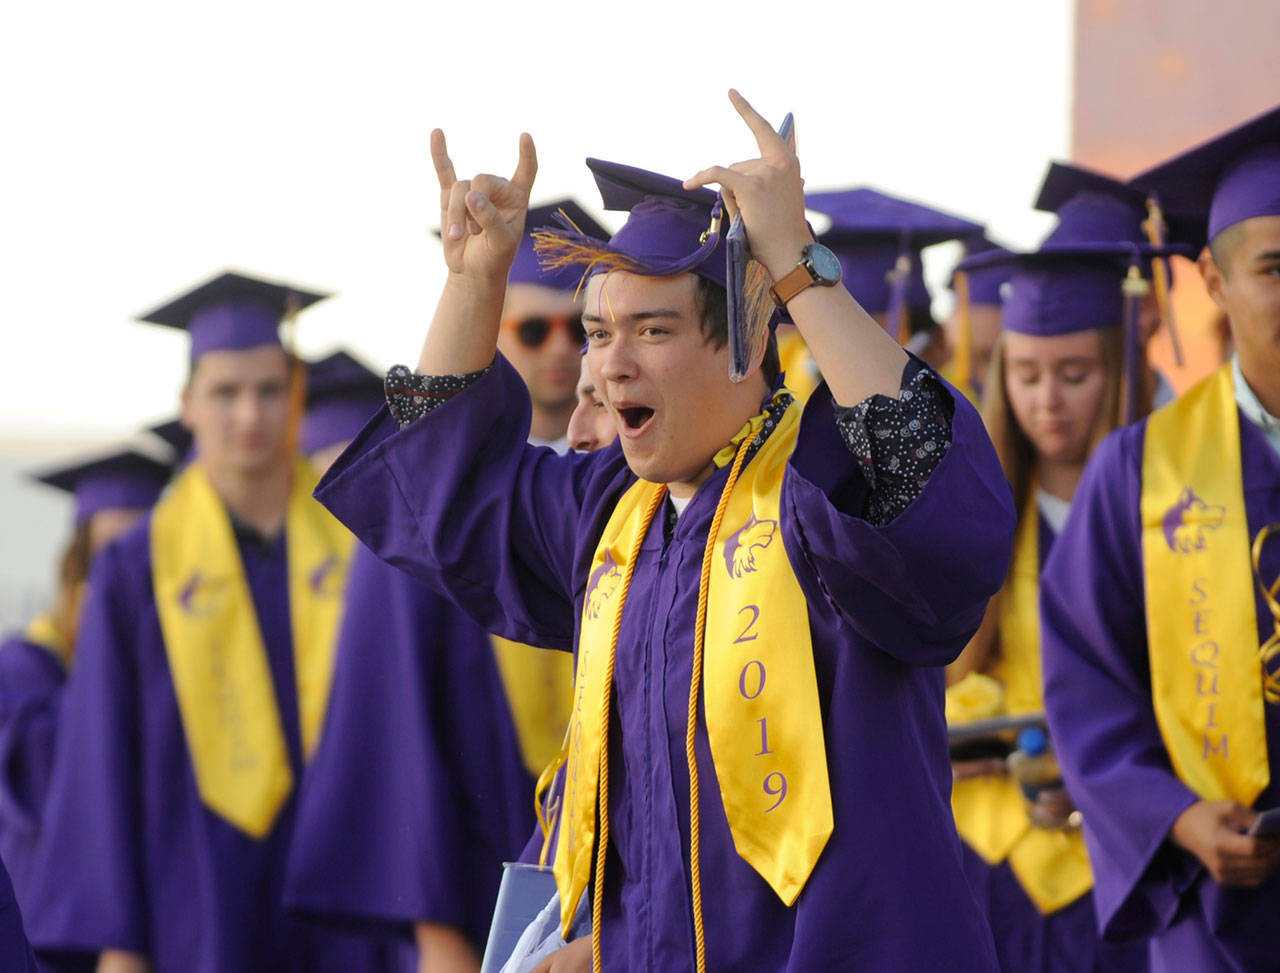 Sequim High graduating senior Tommy Hall lets out a cheer after the SHS commencement ceremony on June 7. More than 180 Sequim High seniors received diplomas this week. Sequim Gazette photo by Michael Dashiell